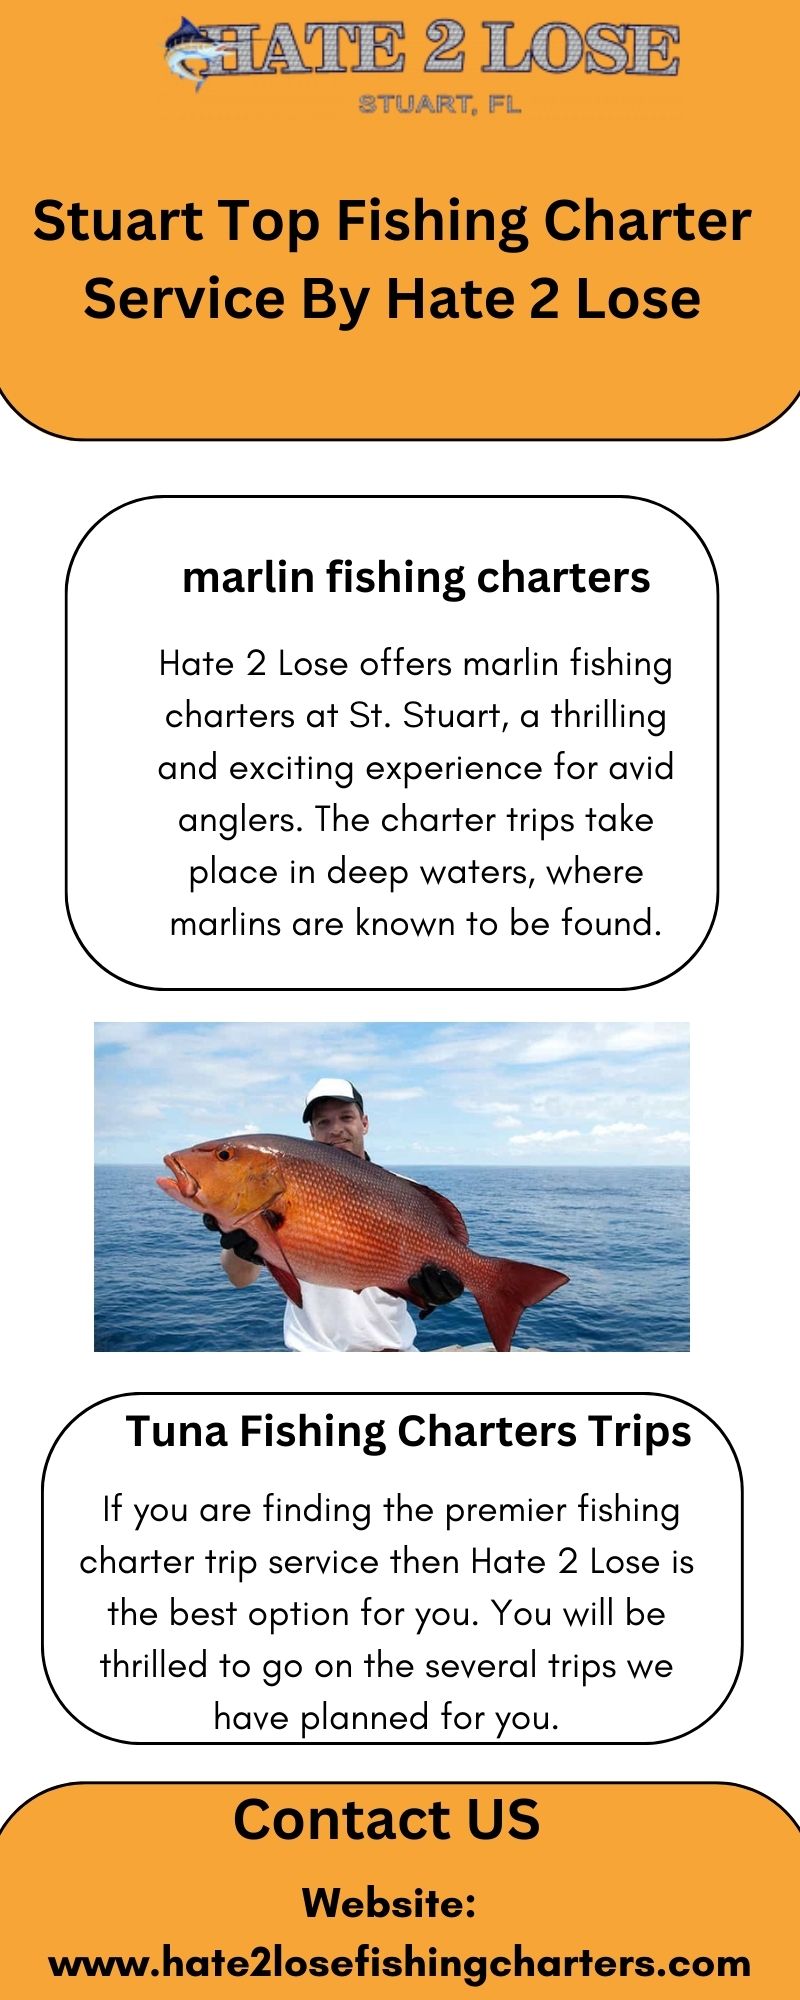 Stuart Top Fishing Charter Service By Hate 2 Lose